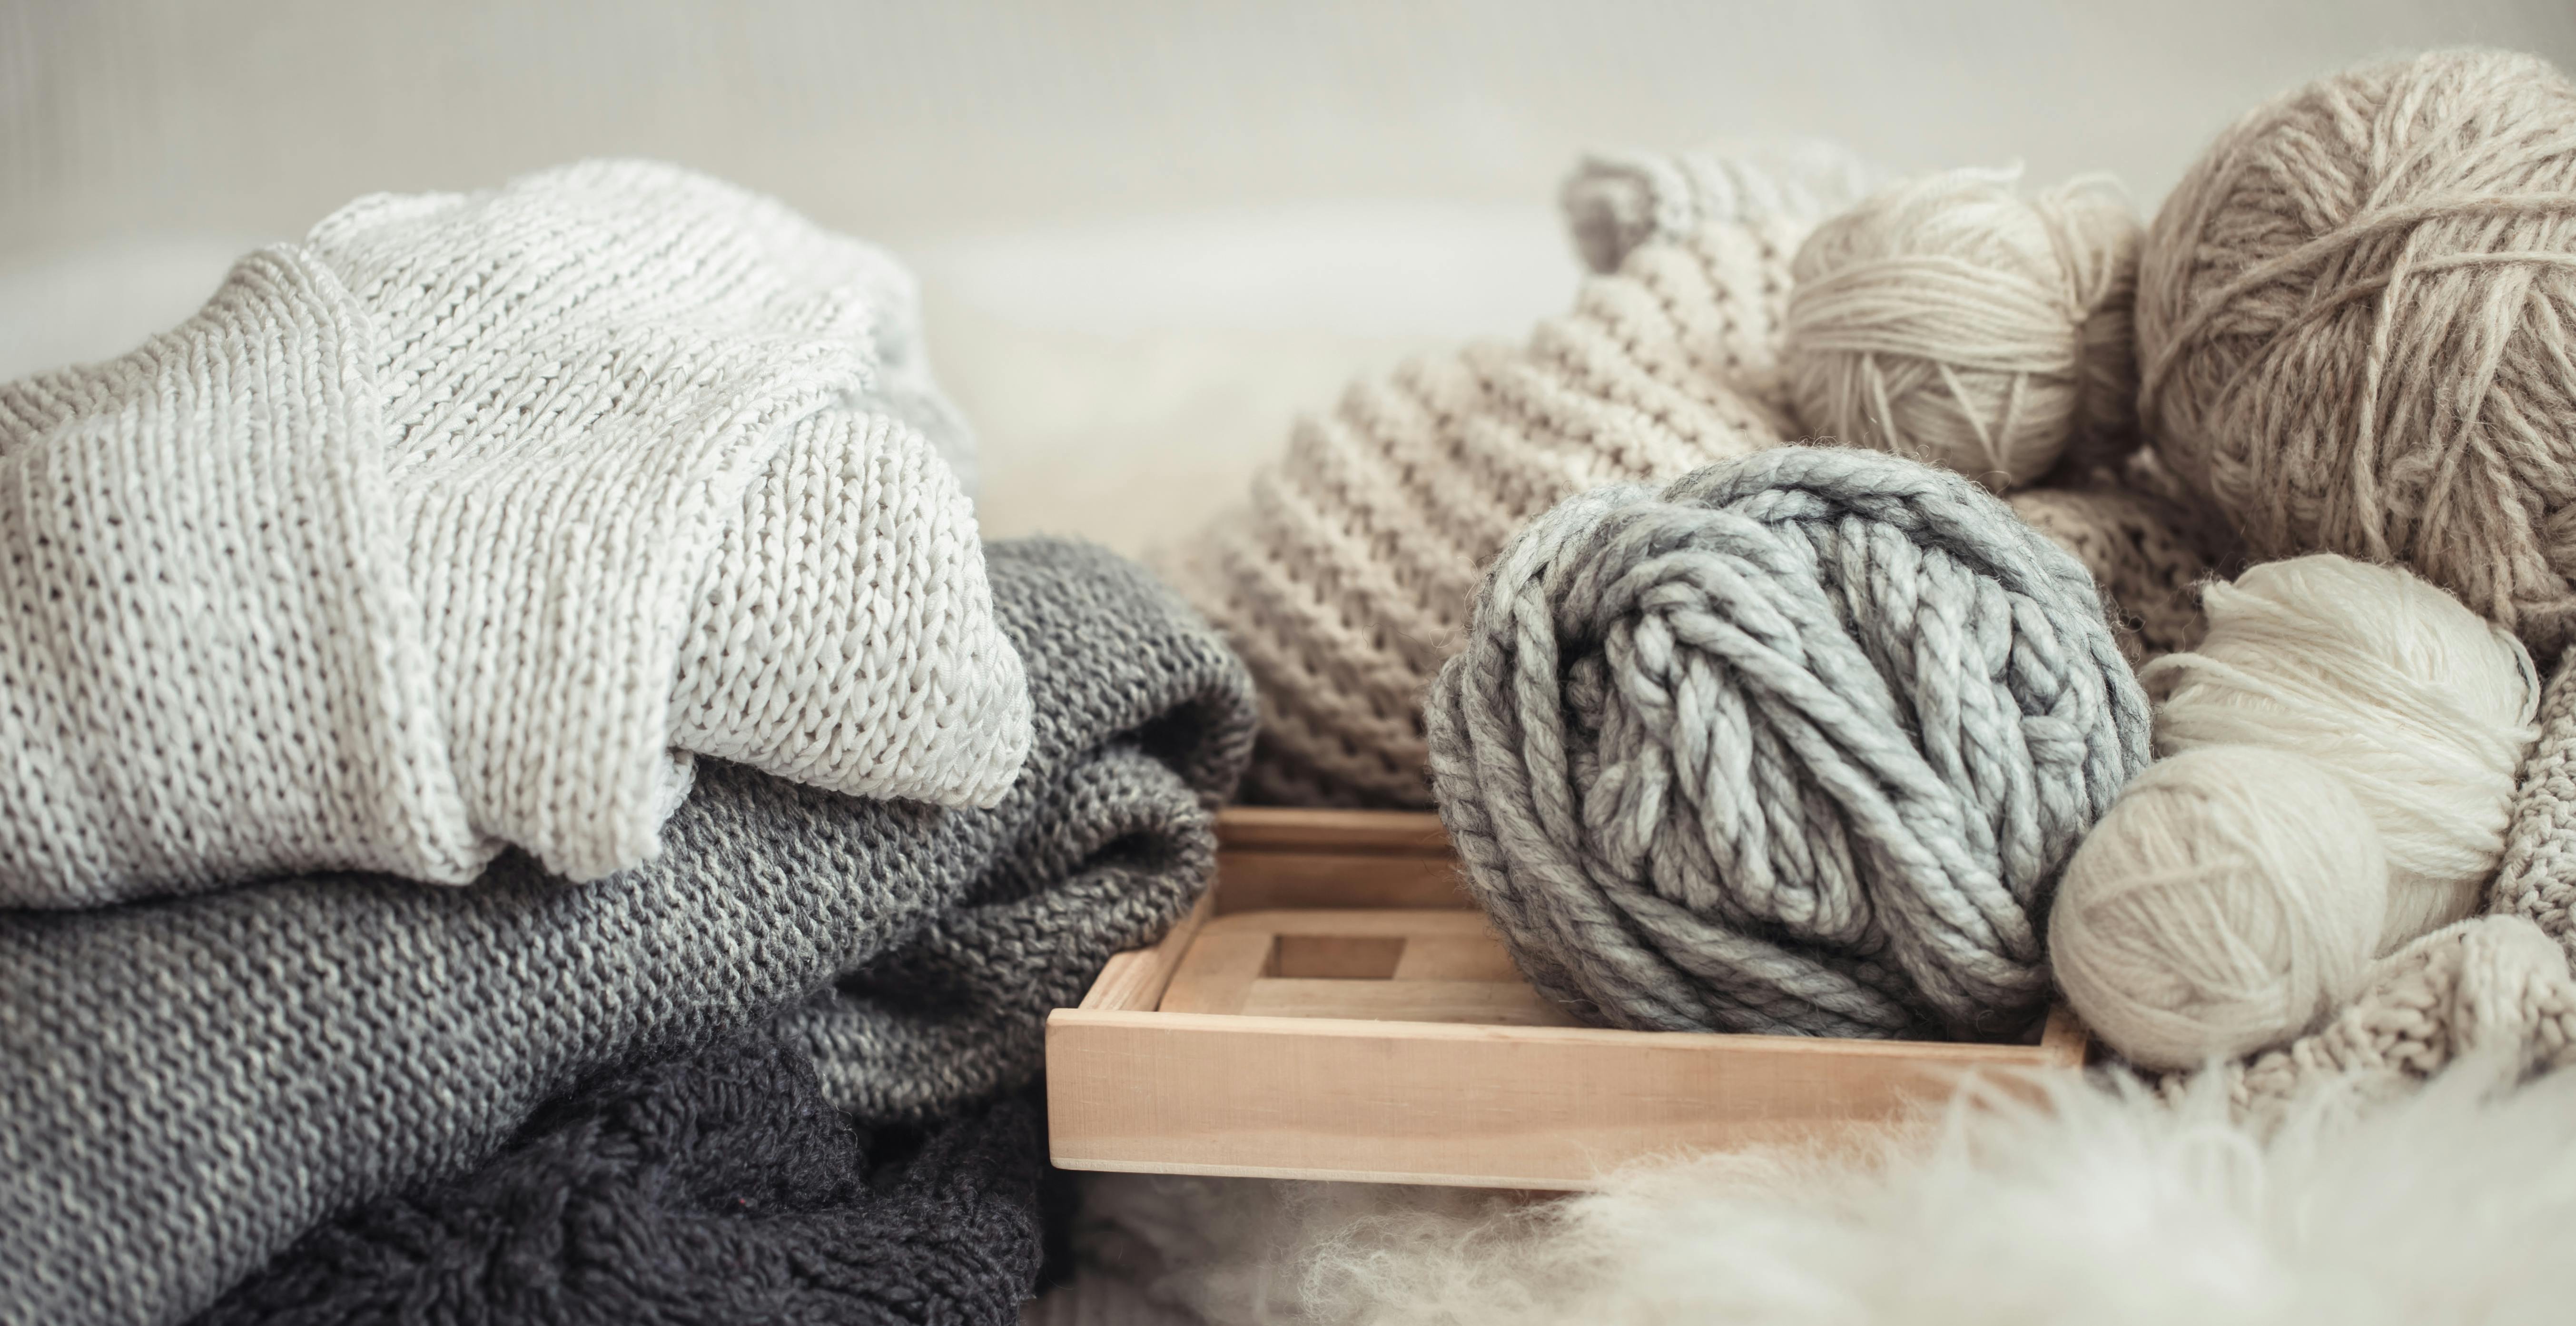  textured yarn and knitted clothing in a pile on a wooden board